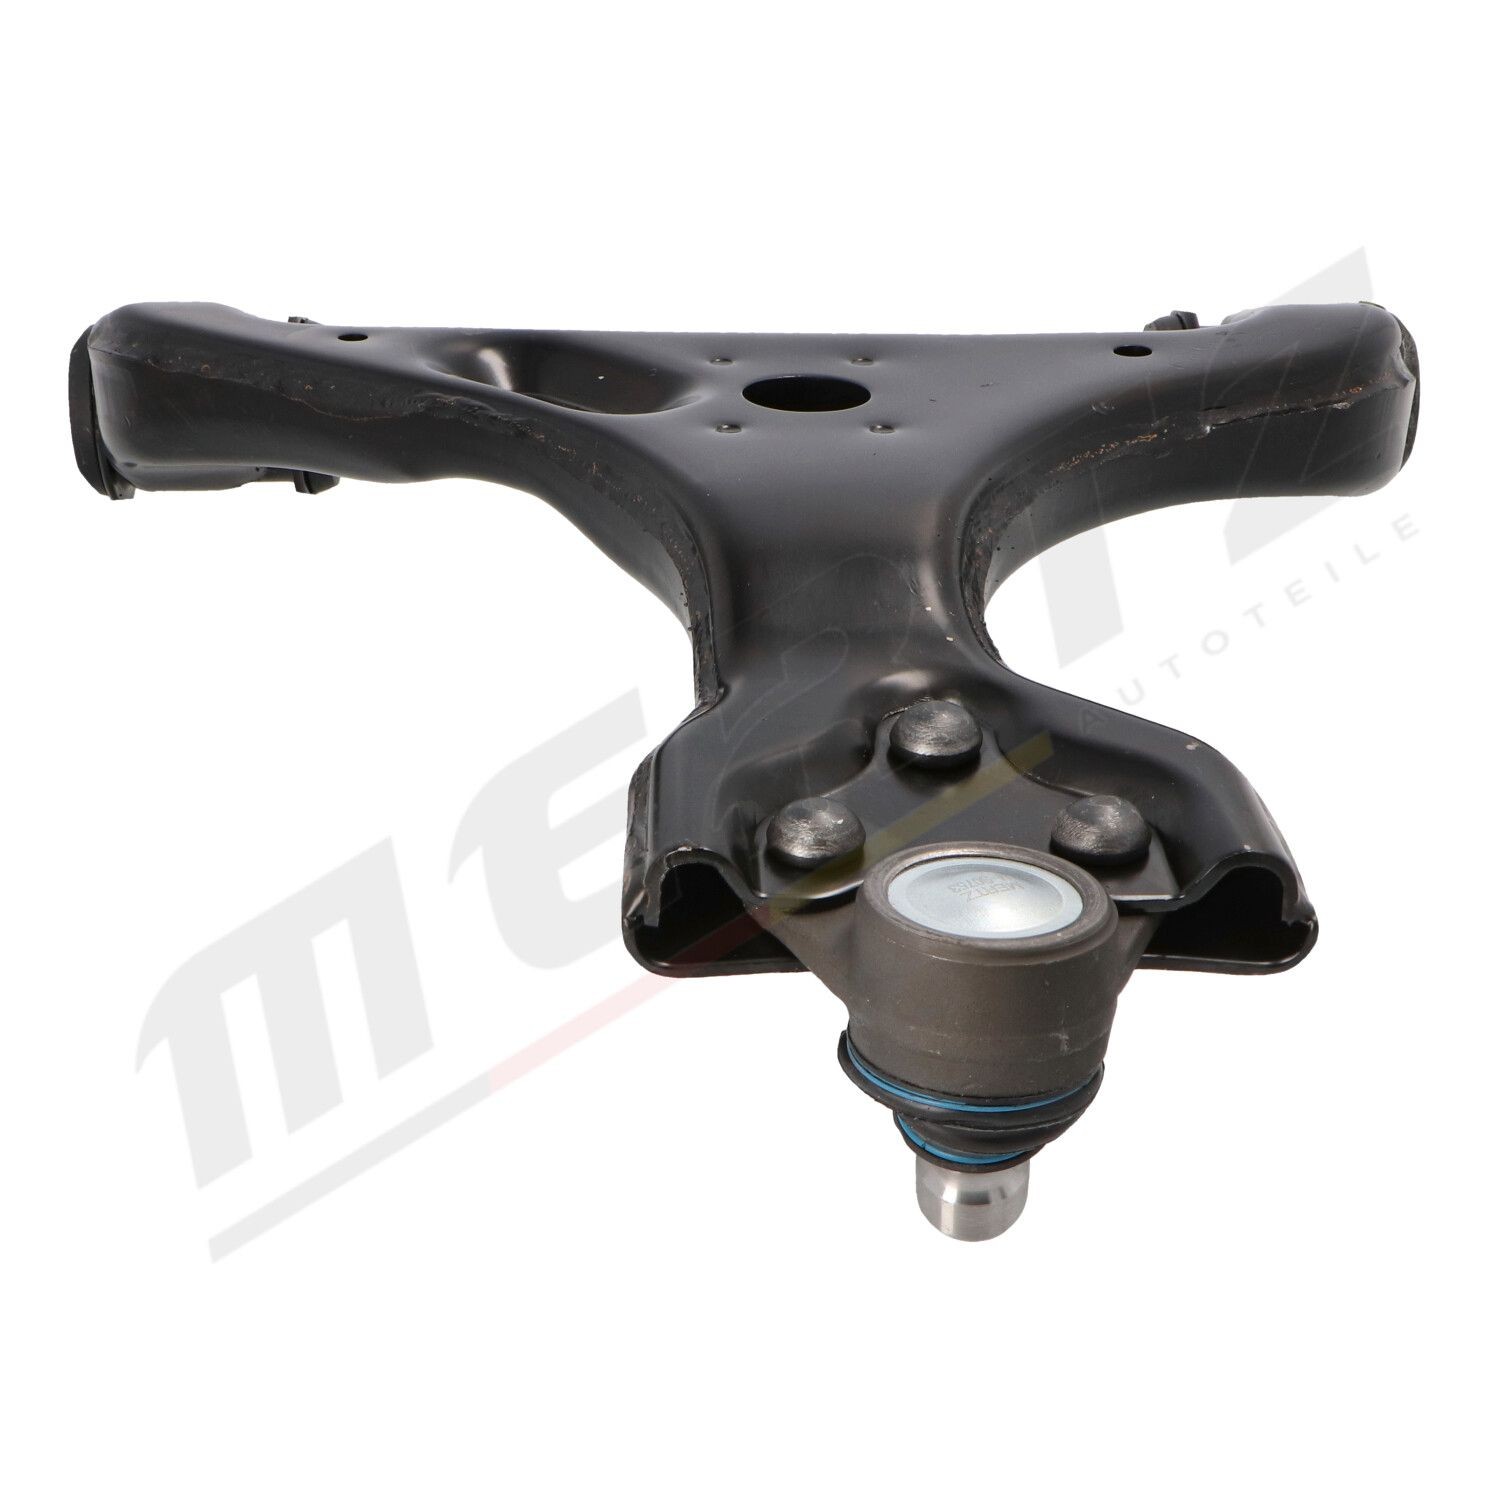 M-S0753 Suspension wishbone arm M-S0753 MERTZ with bearing(s), Front Axle Right, Control Arm, Sheet Steel